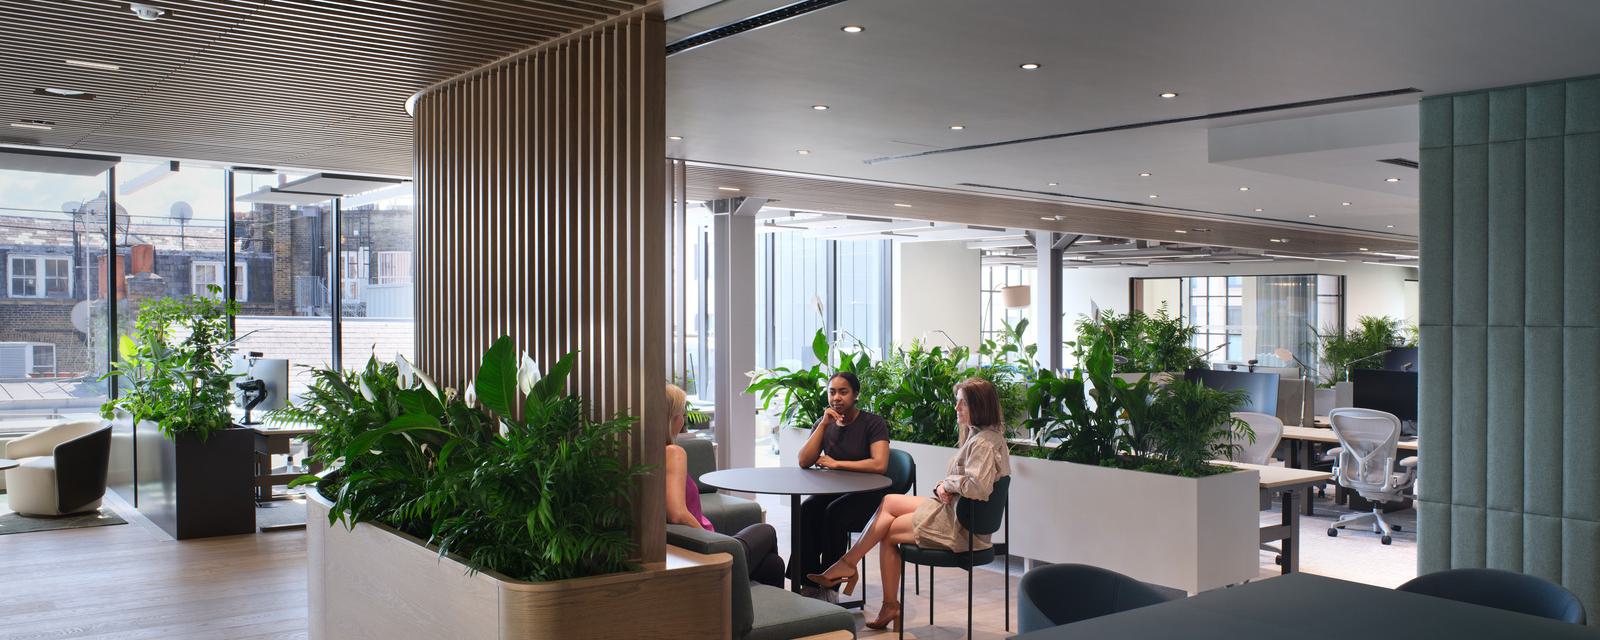 Grainhouse - office floor with planting and people sitting at table in breakout space